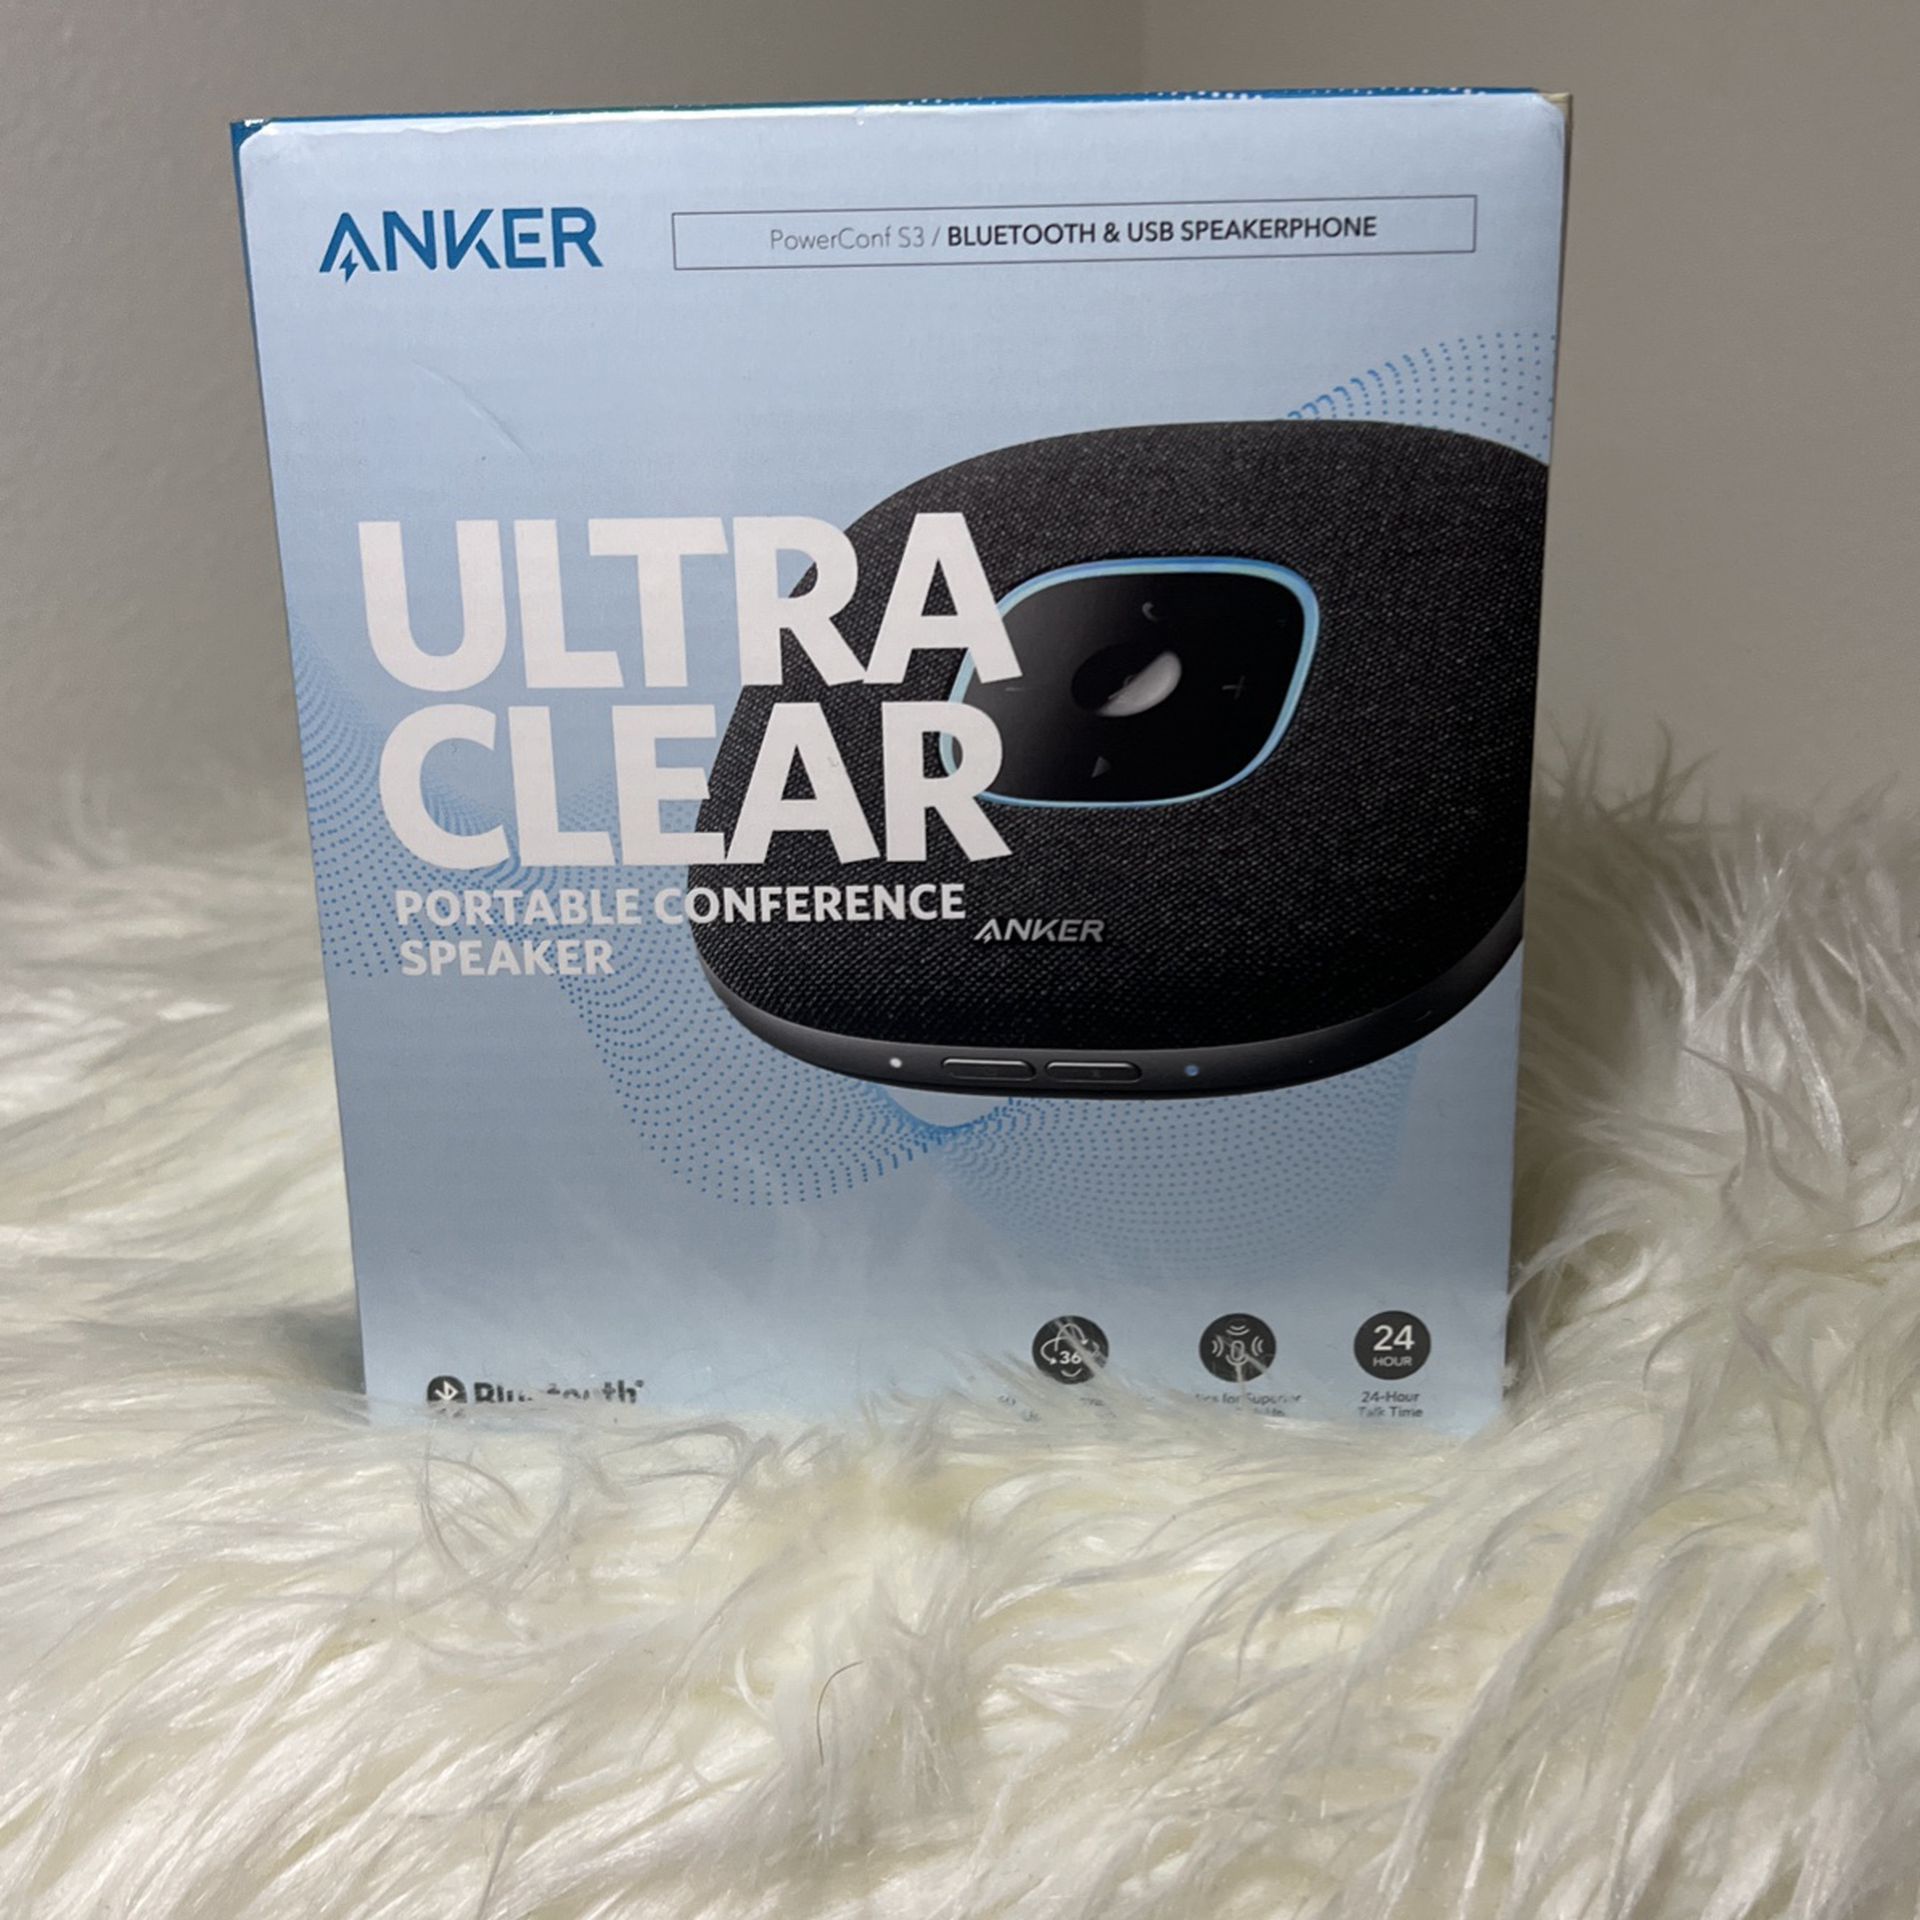 Portable Conference Speaker ANKER powerconf S3